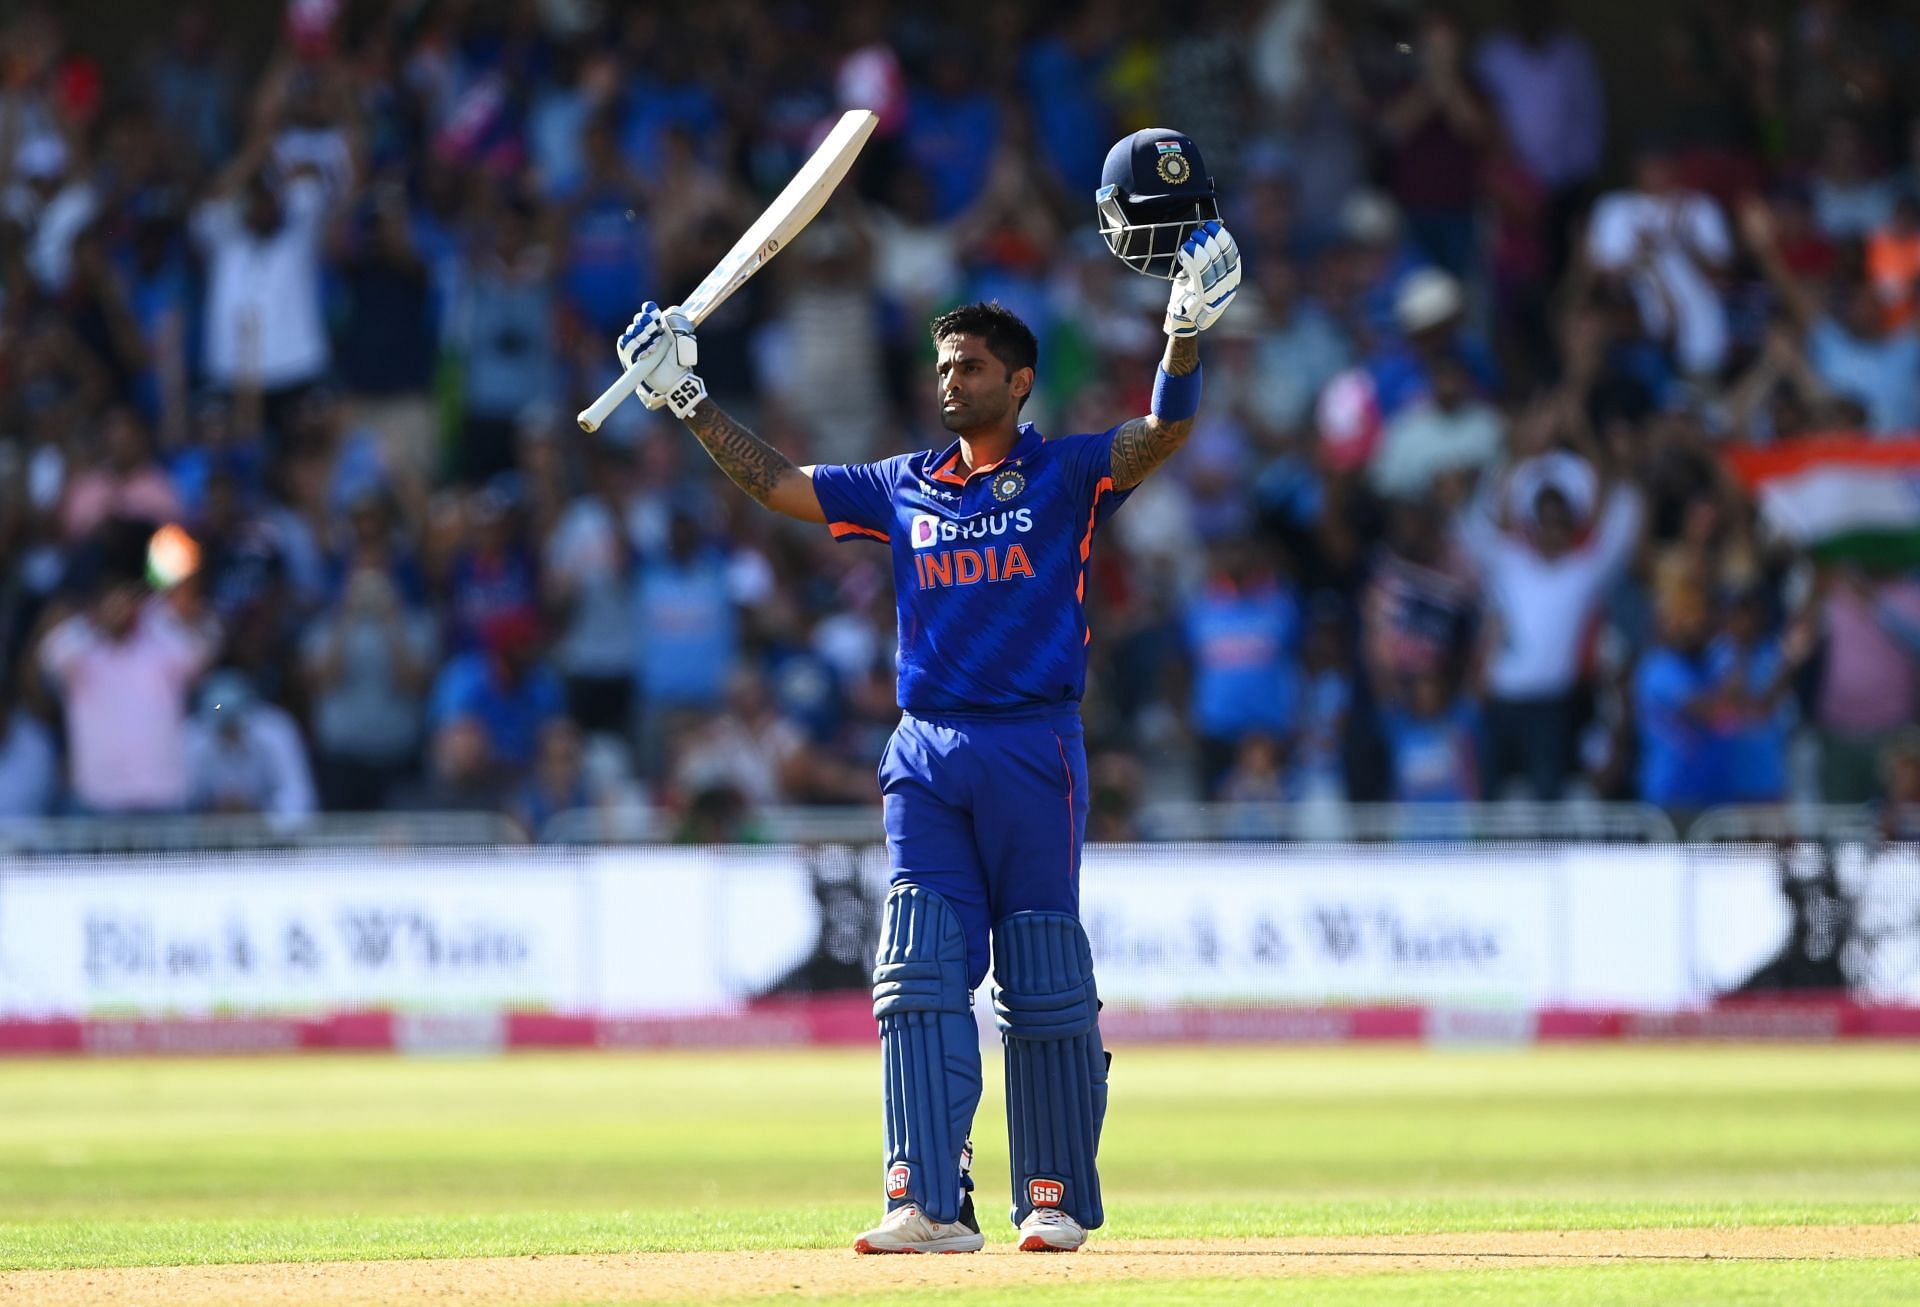 Suryakumar Yadav batted at No. 5 in the ODI series against England